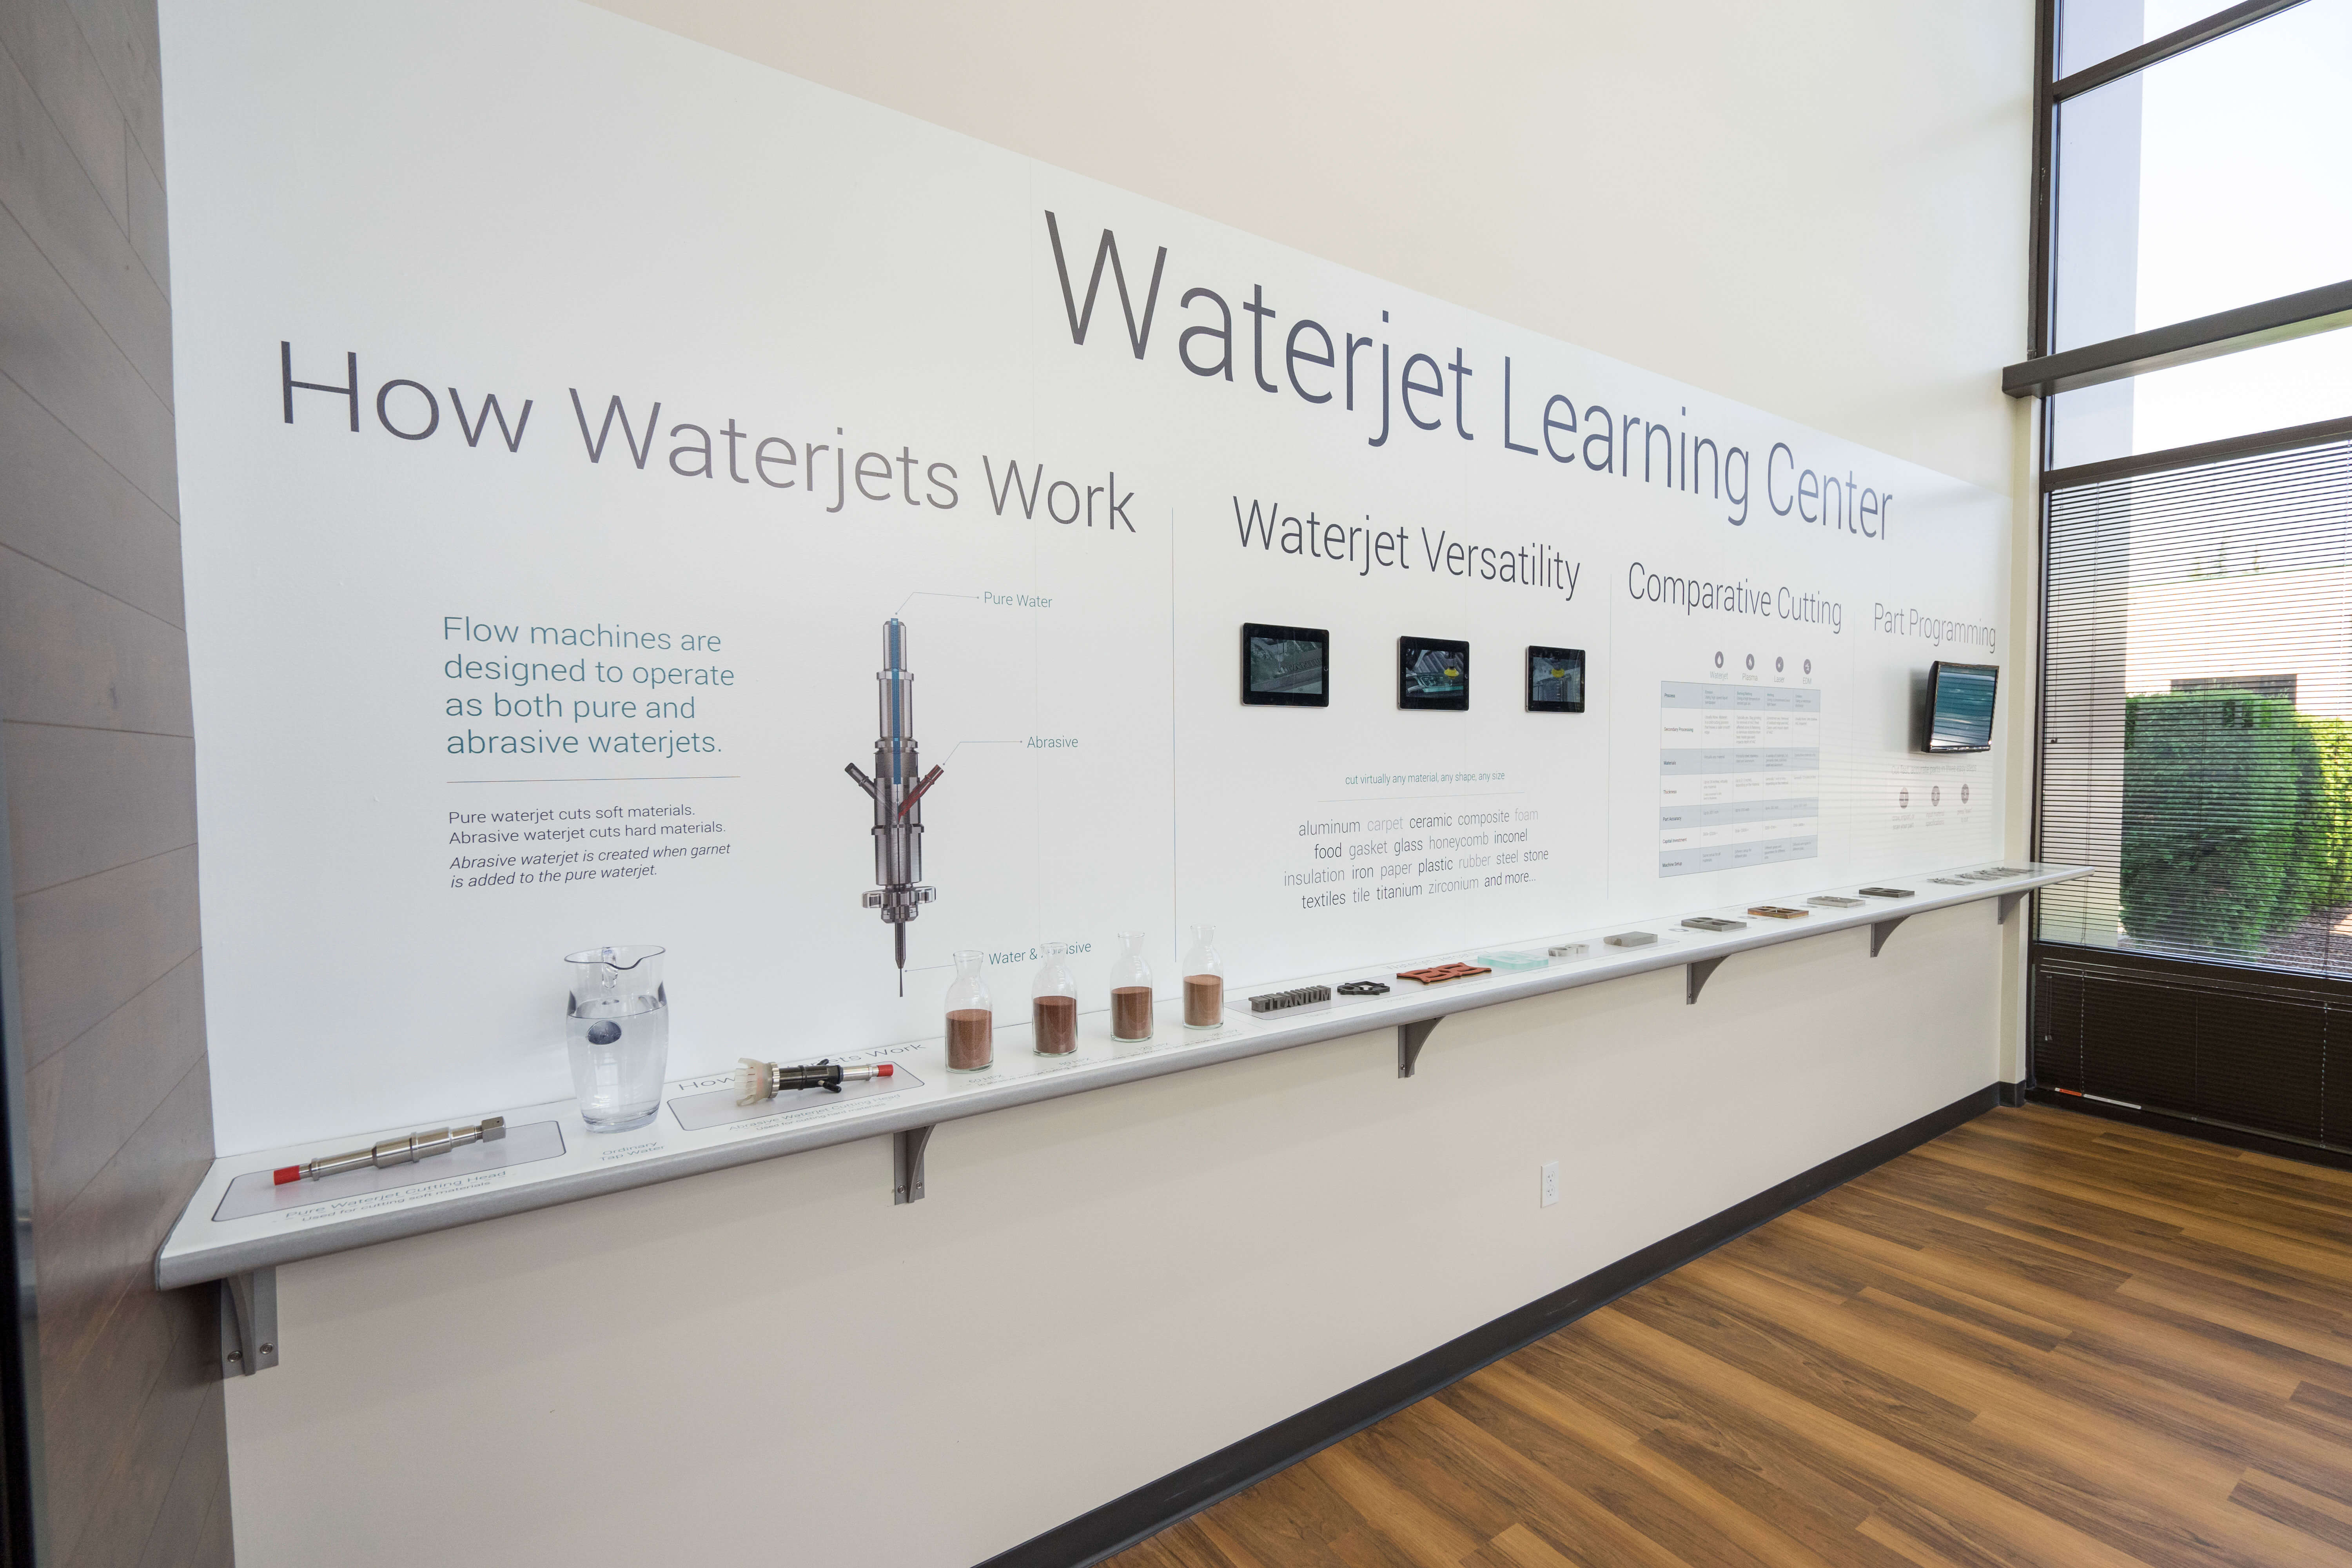 Waterjet educational display at the Flow Customer Technology Center